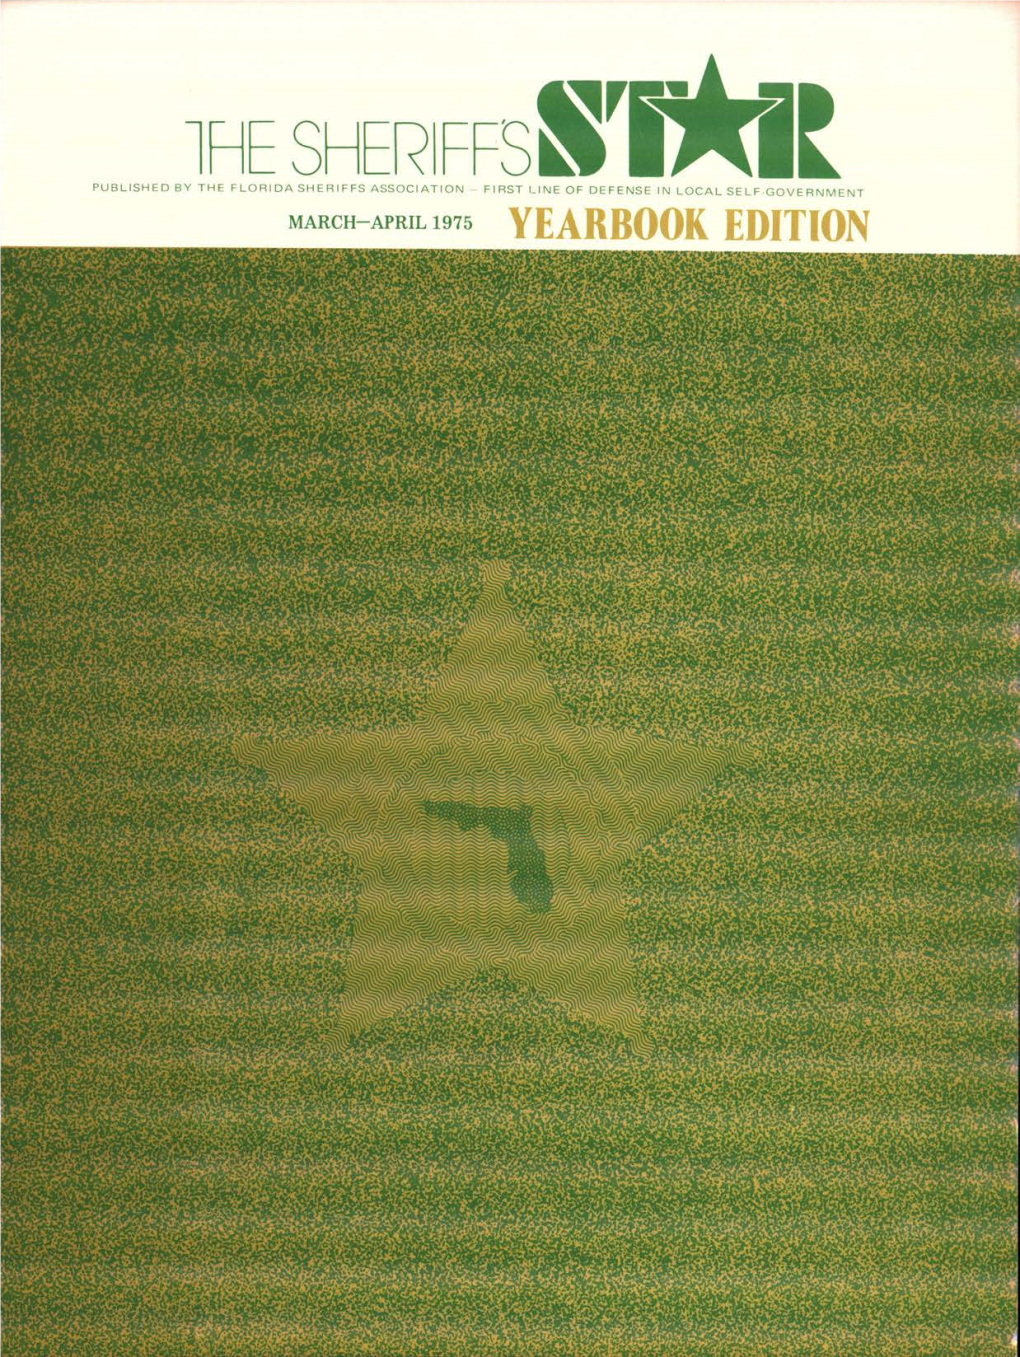 MARCH —APRIL 1975 YEARBOOK EDITION Contents NO